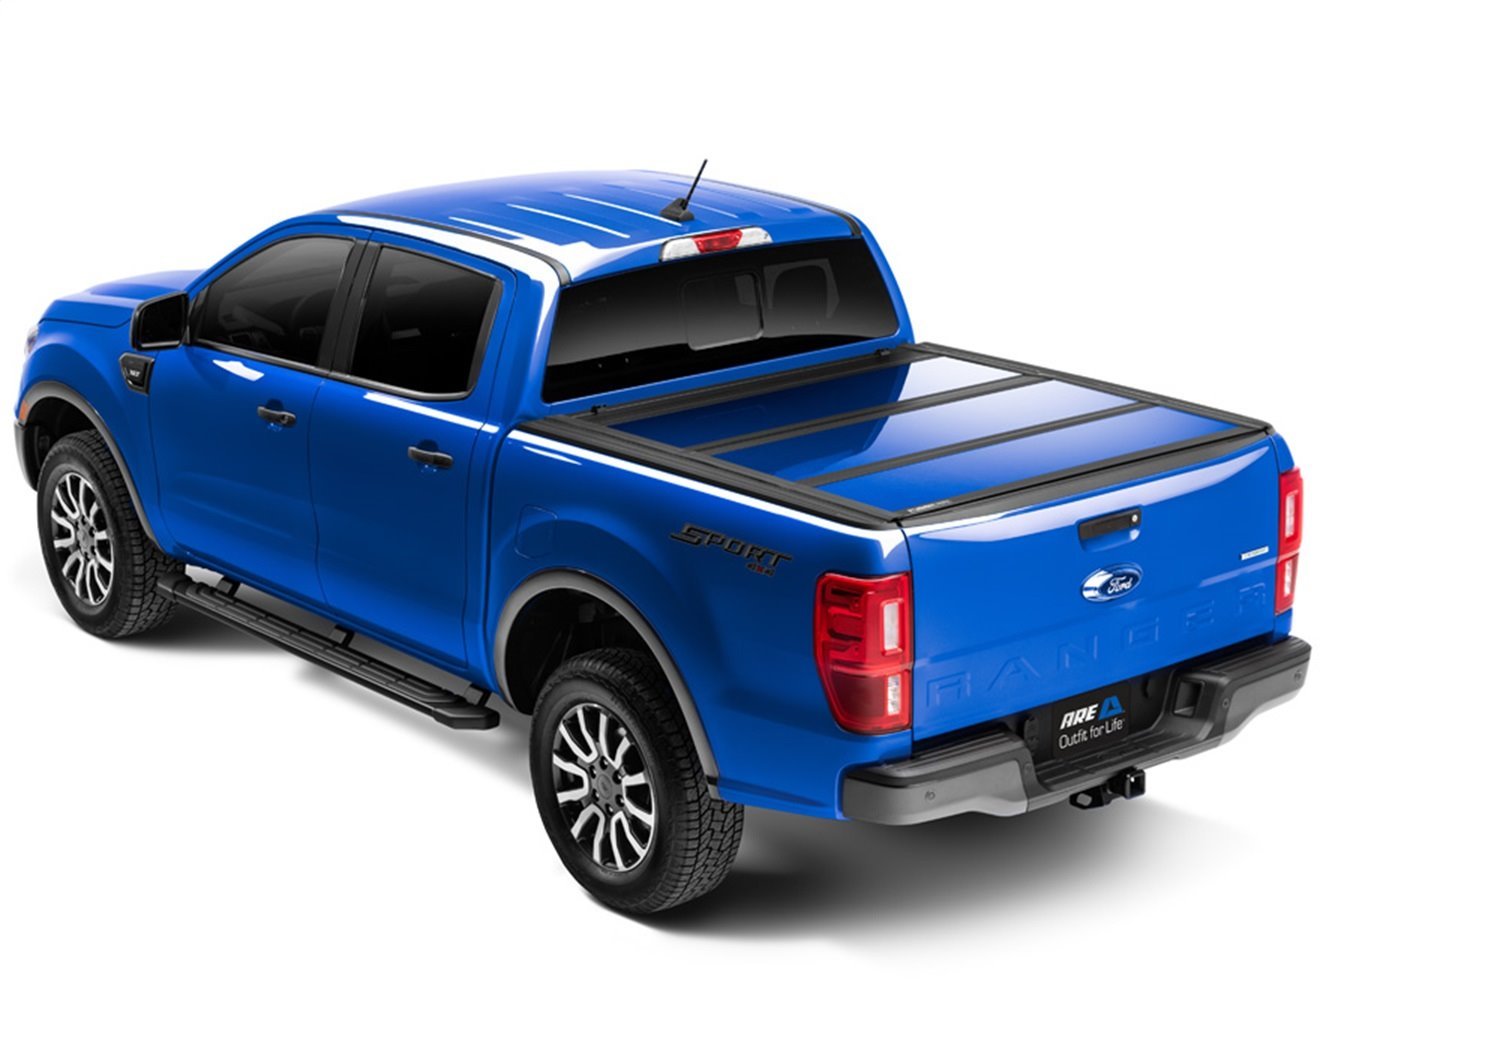 Fusion Tonneau Cover Fits Select Ford F-150 [Bed: 5 ft. 6 in.]